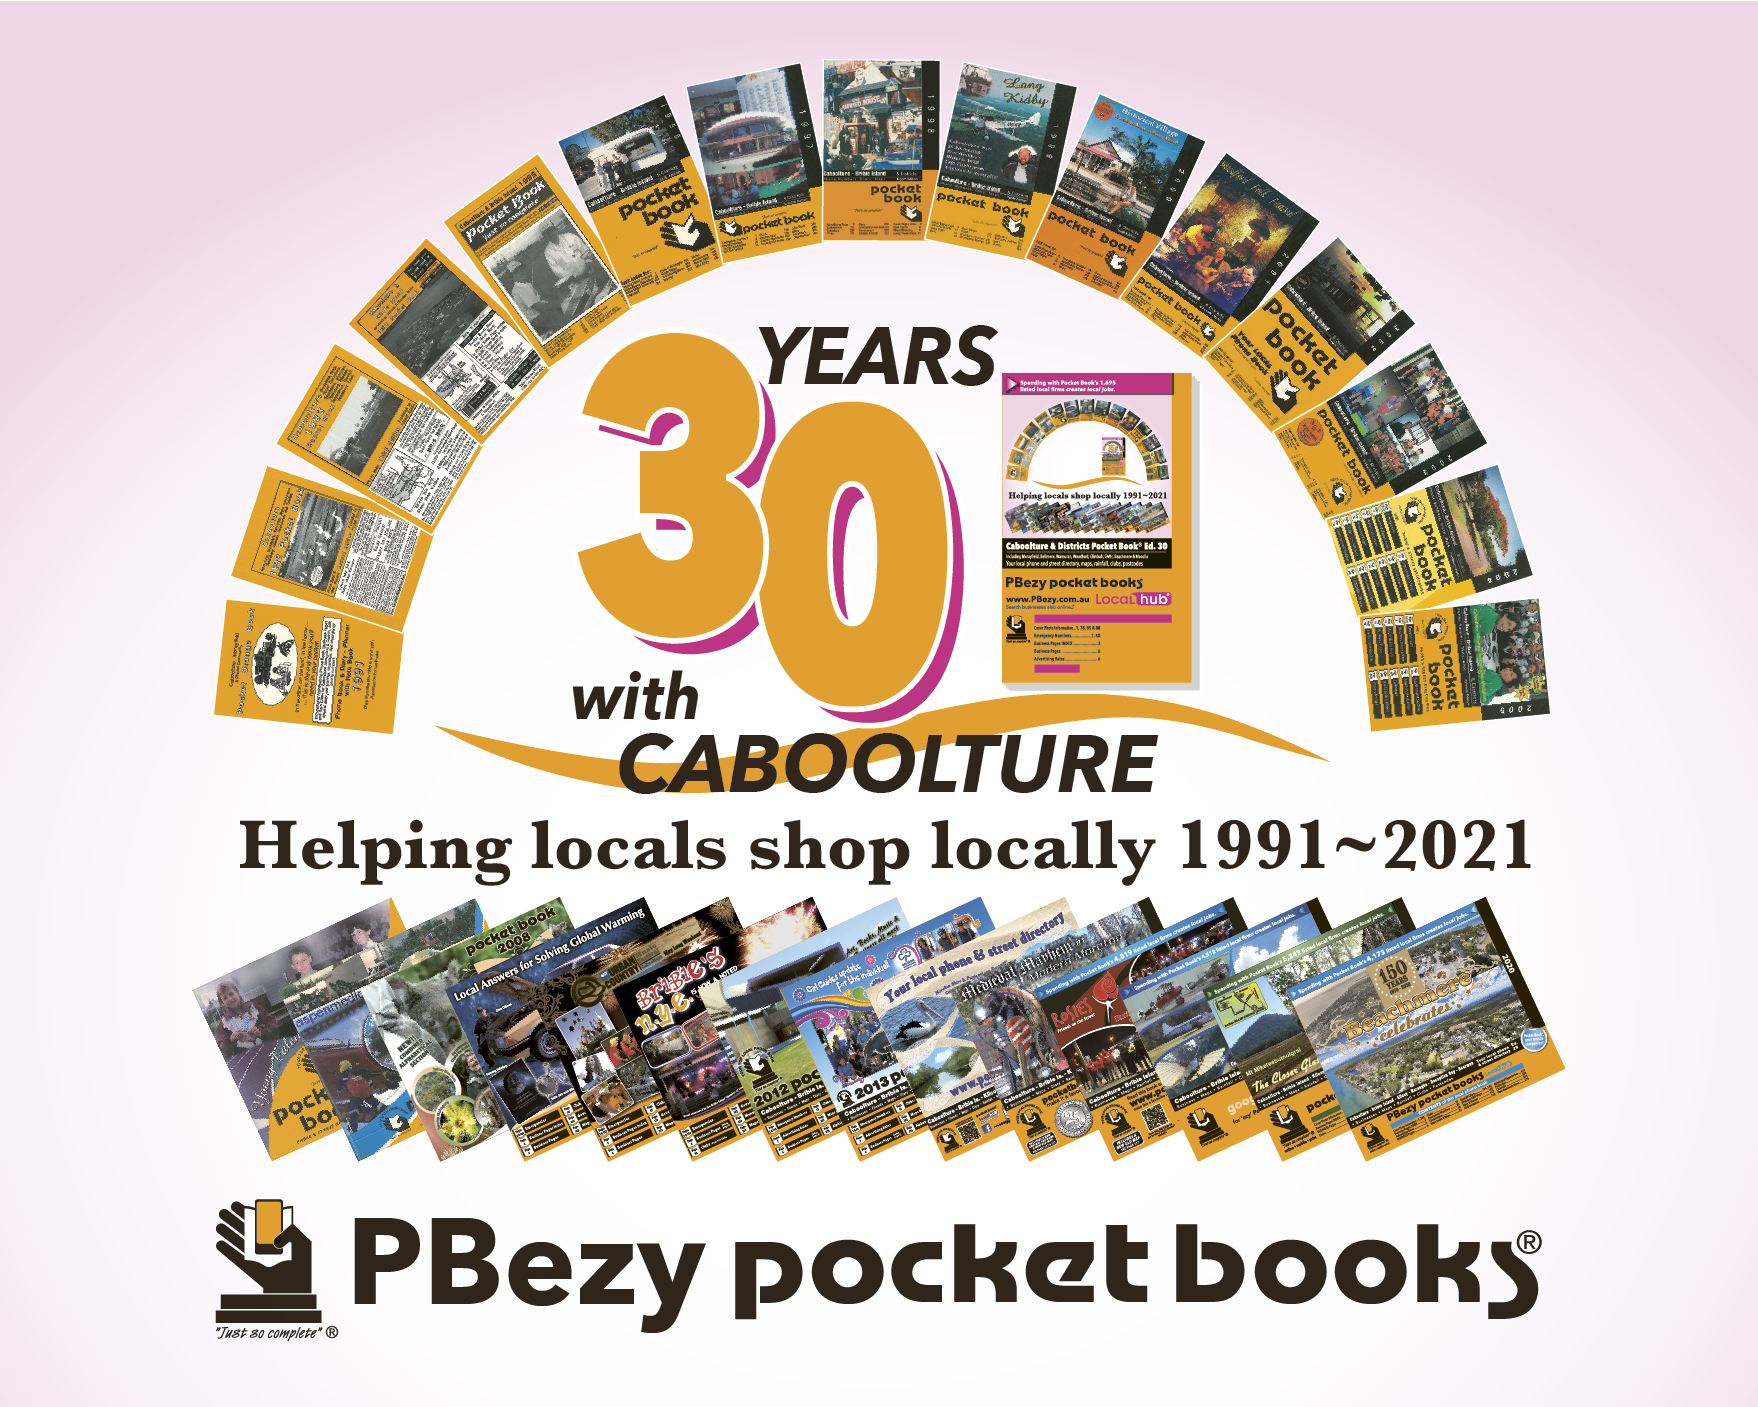 30 Years of Pocket Books in the Caboolture Region